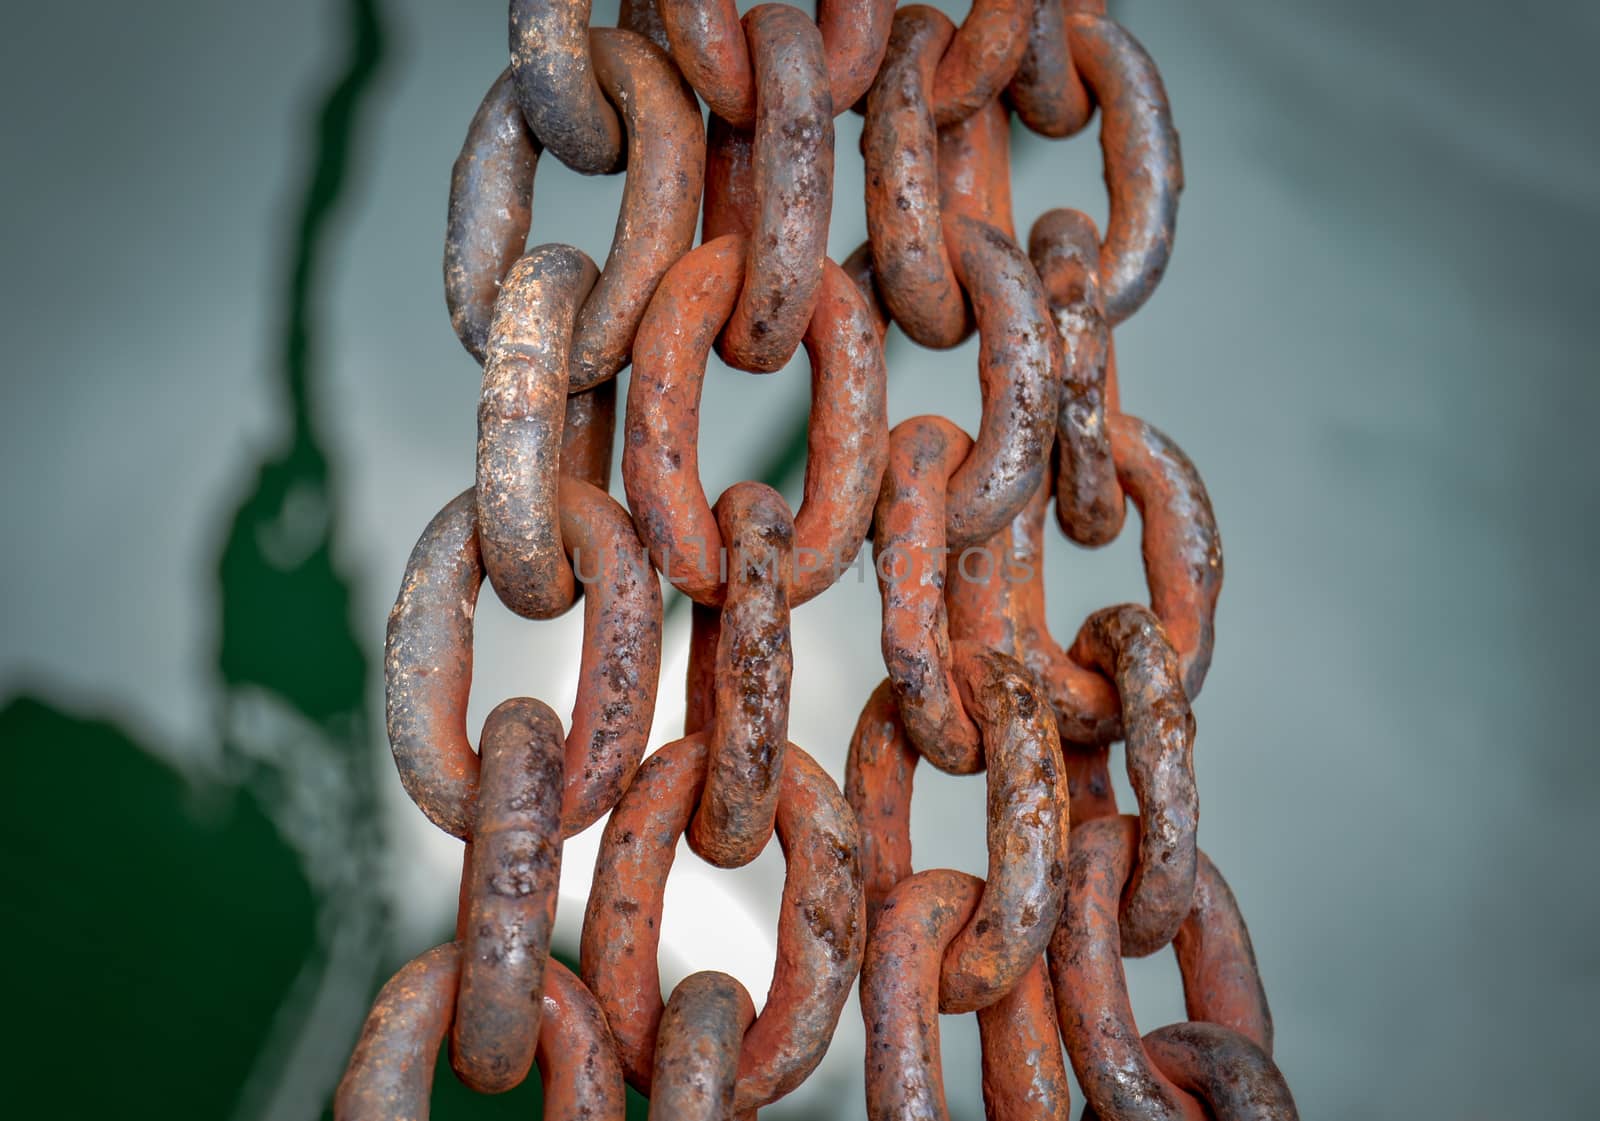 Nautical Image Of Rusty Chains Over Green, Still Ocean Water